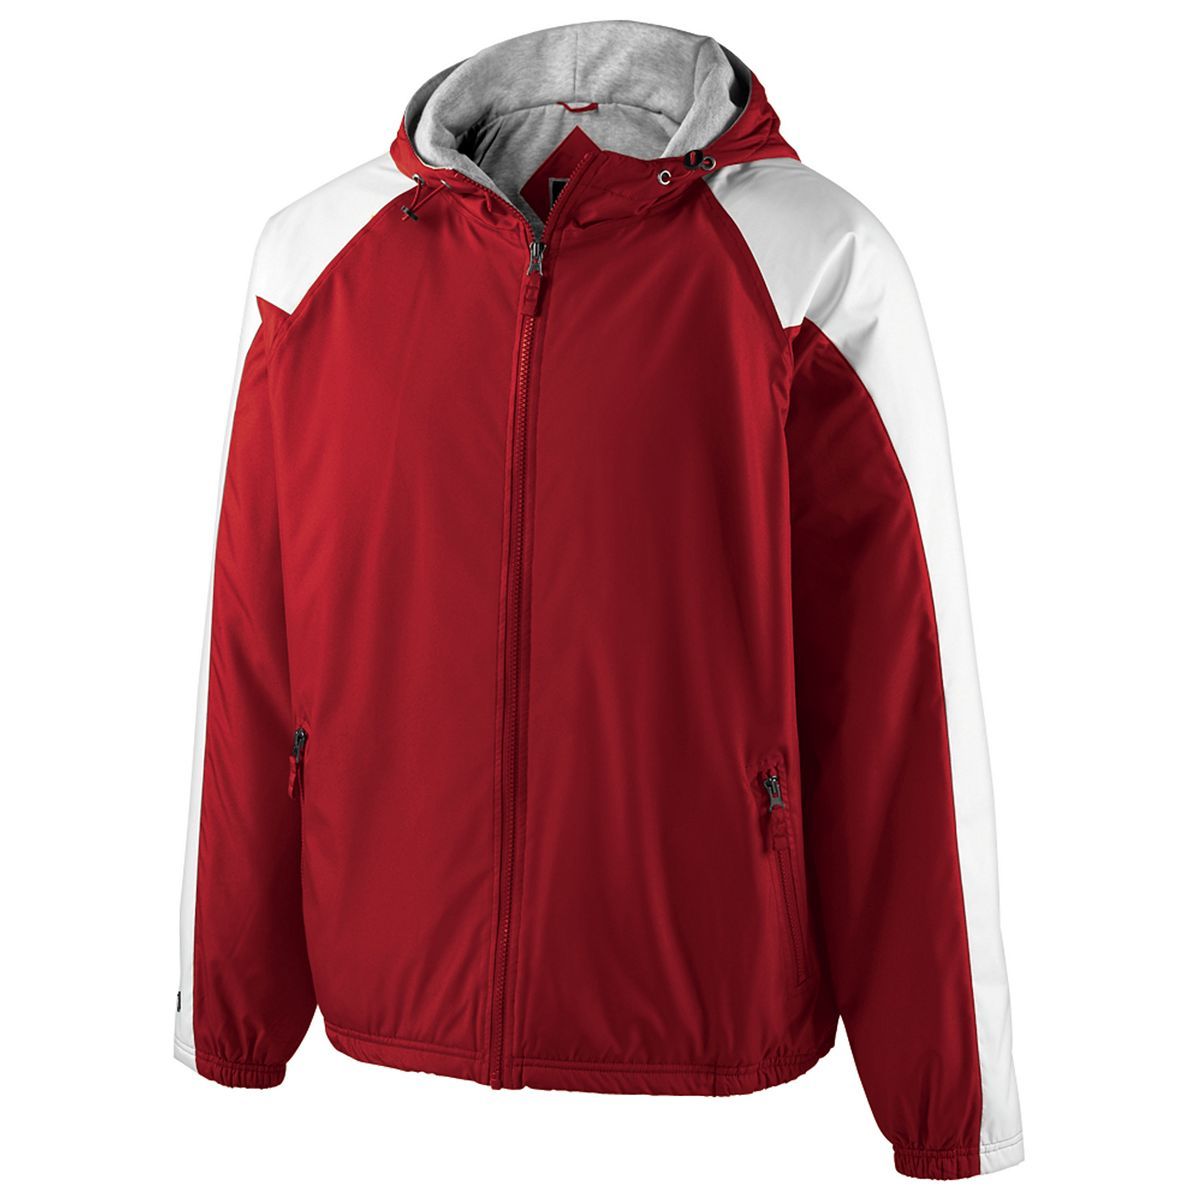 Holloway Homefield Jacket in Scarlet/White  -Part of the Adult, Adult-Jacket, Holloway, Outerwear product lines at KanaleyCreations.com